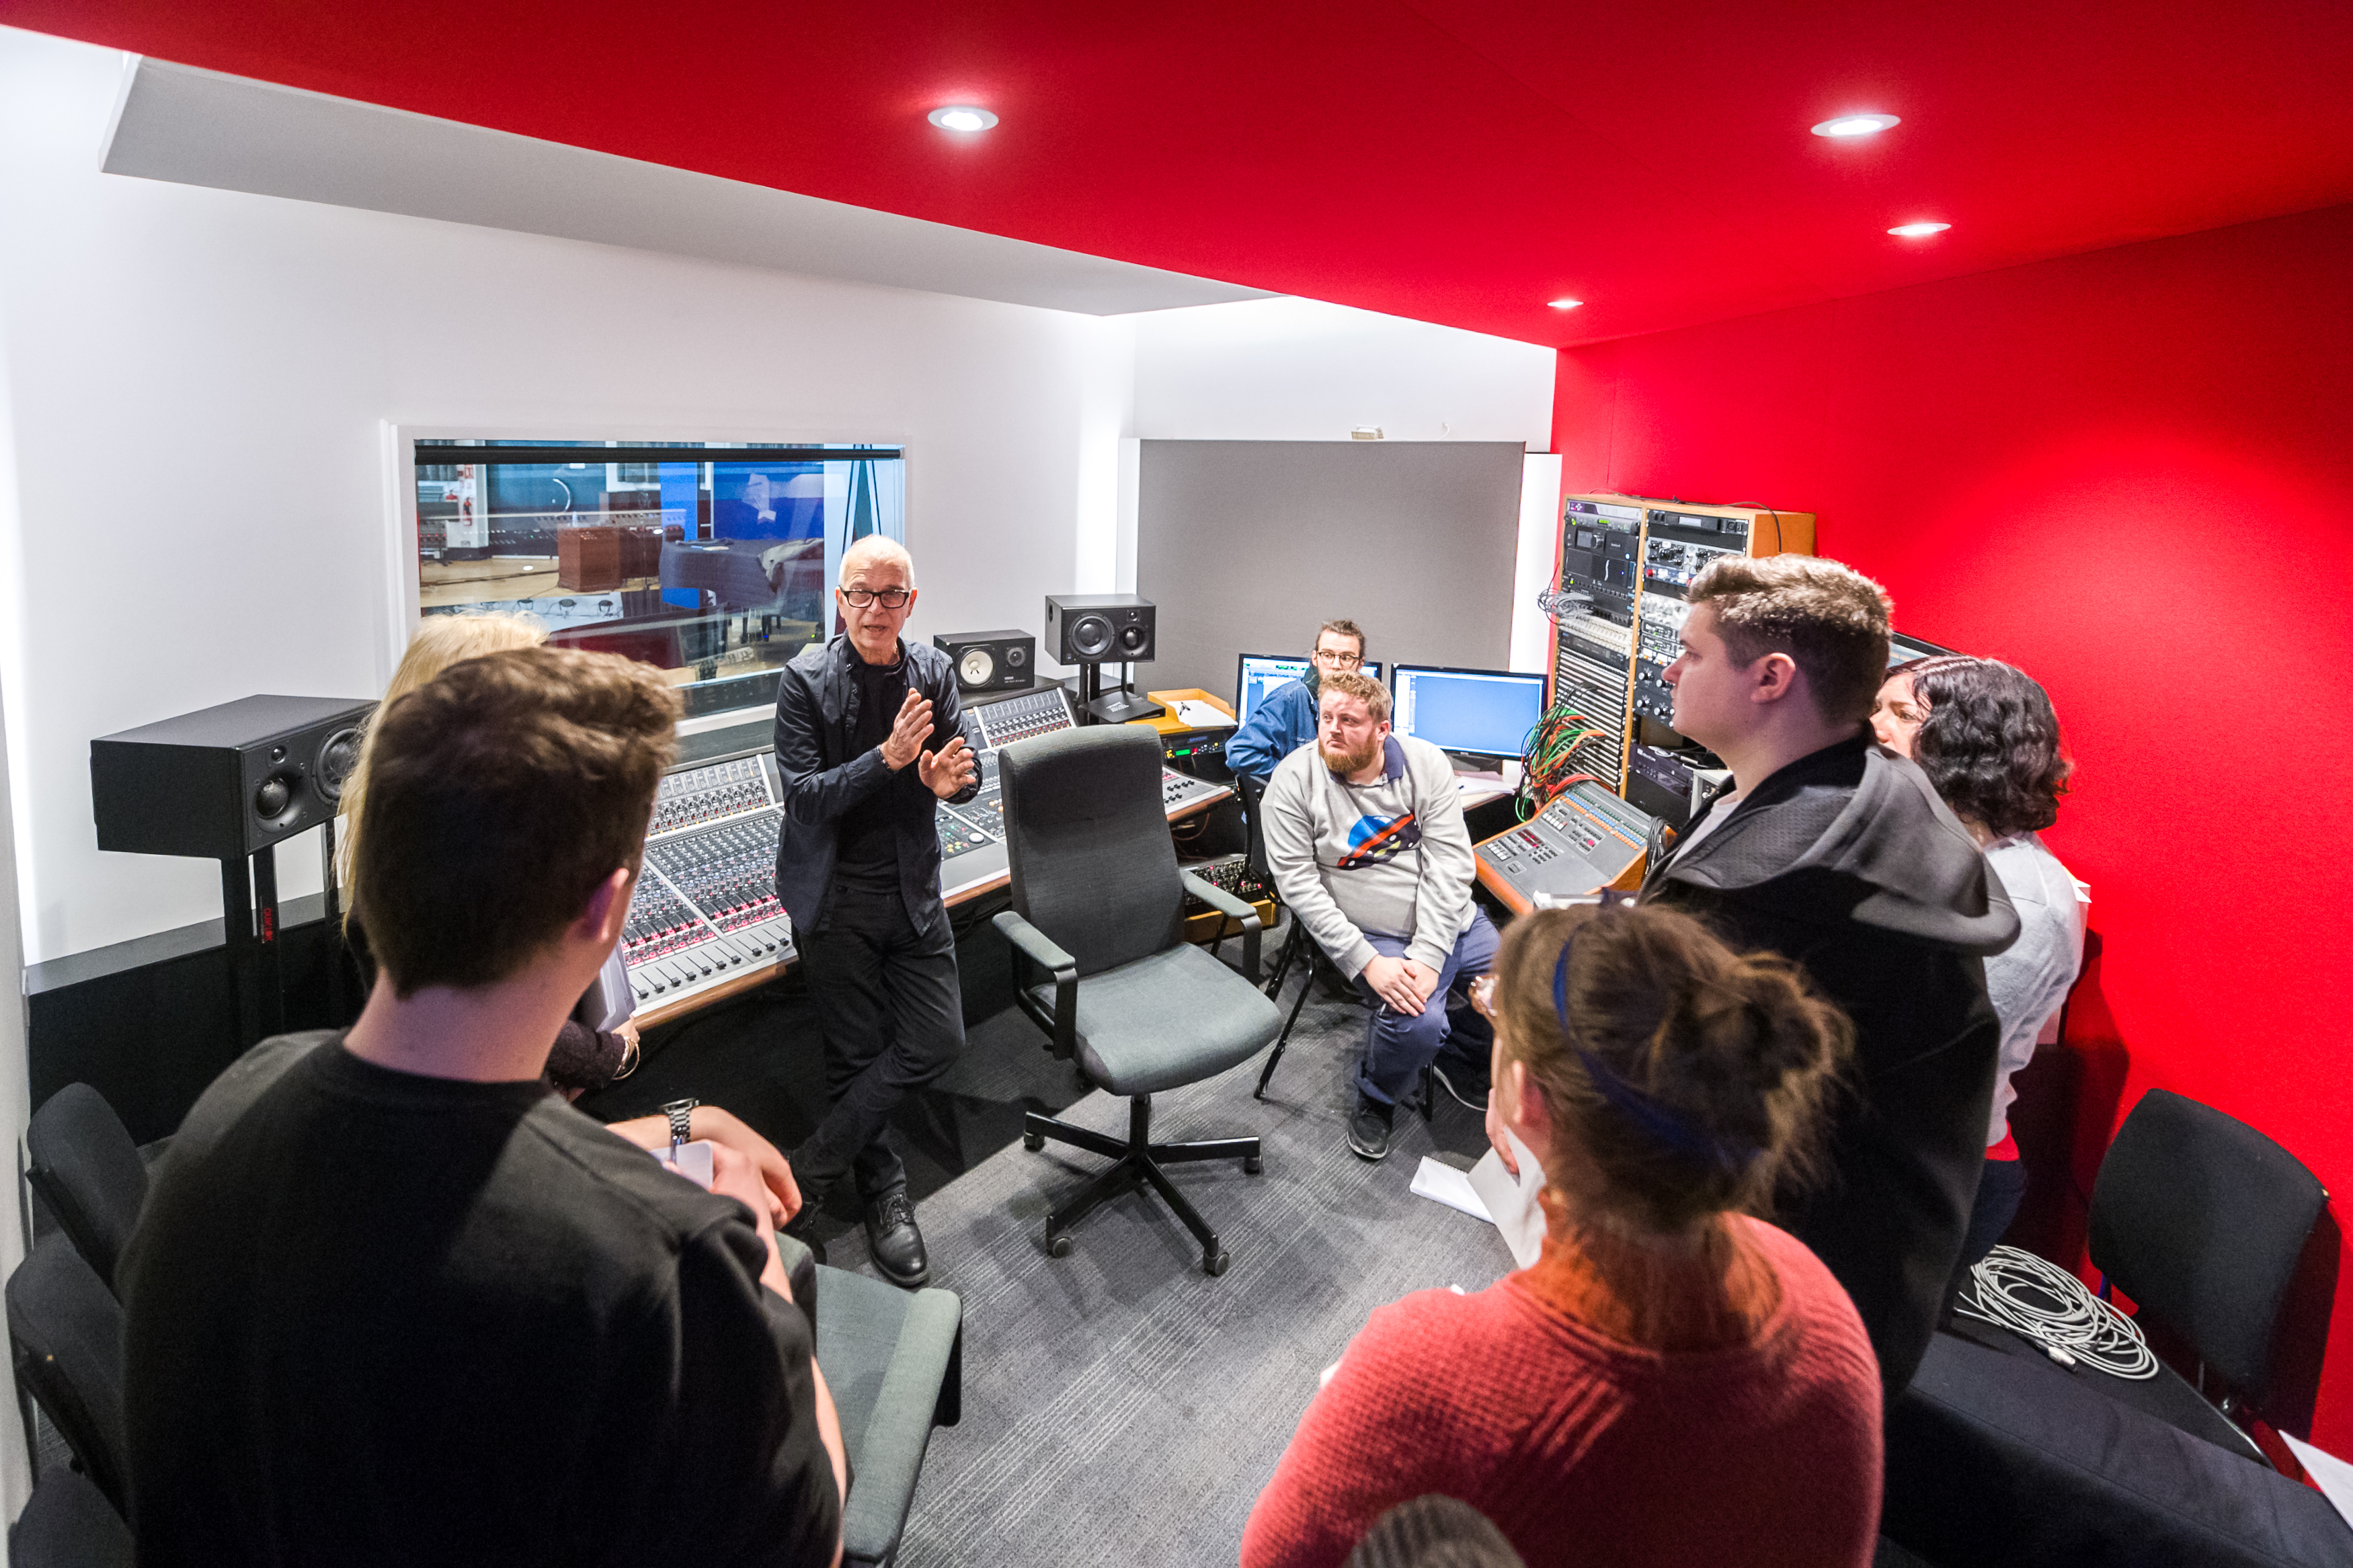 A photograph of Tony Visconti and his team.